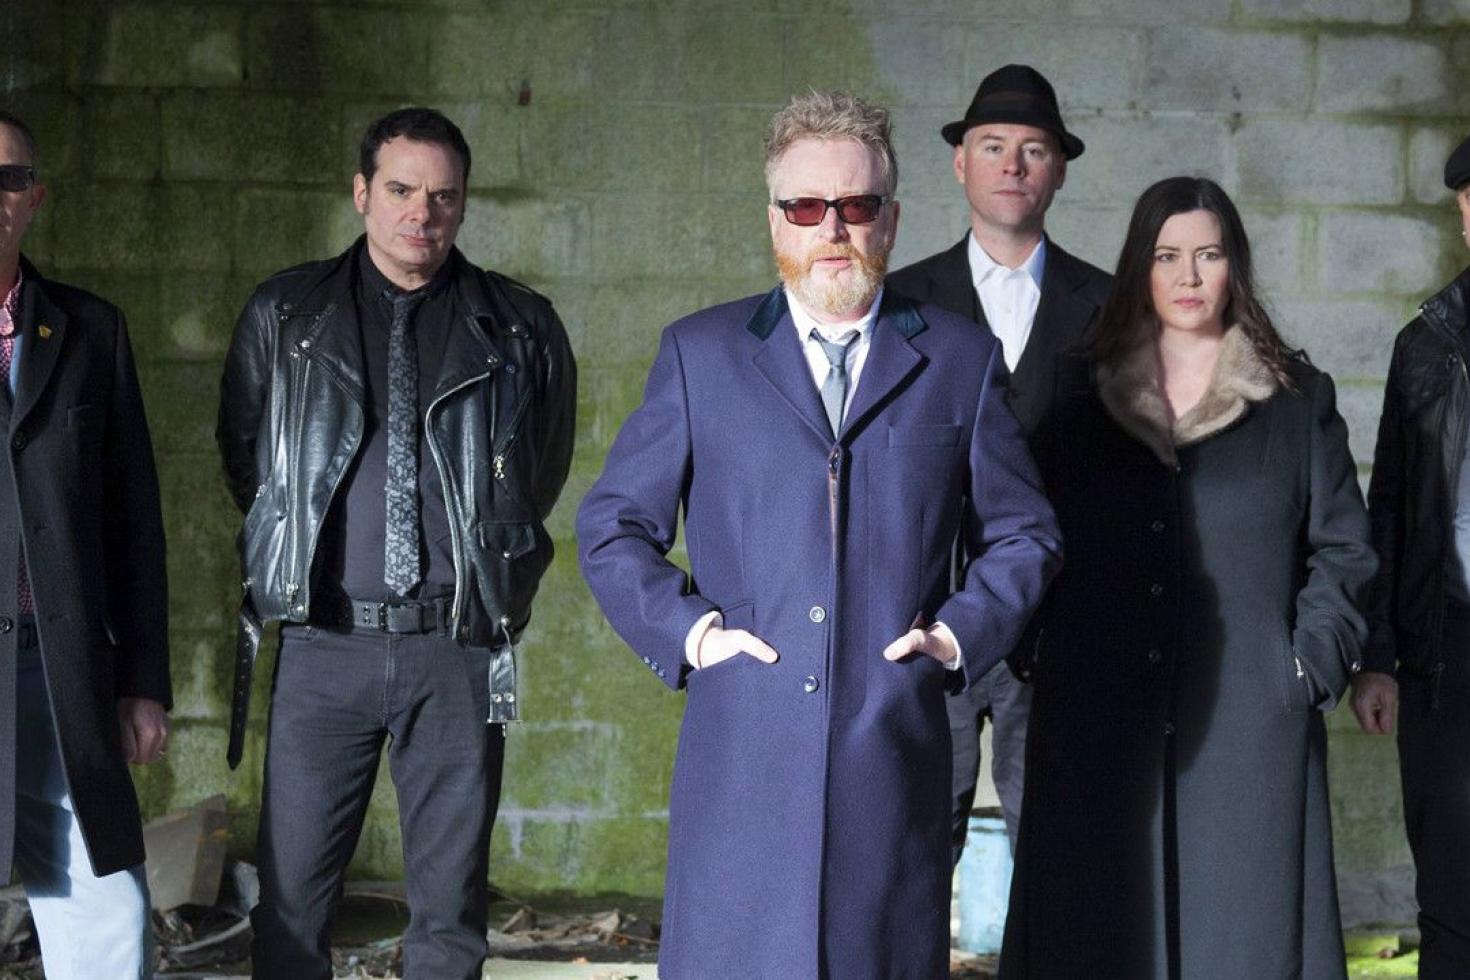 Flogging Molly to air “Happy Hour With Flogging Molly” this Friday